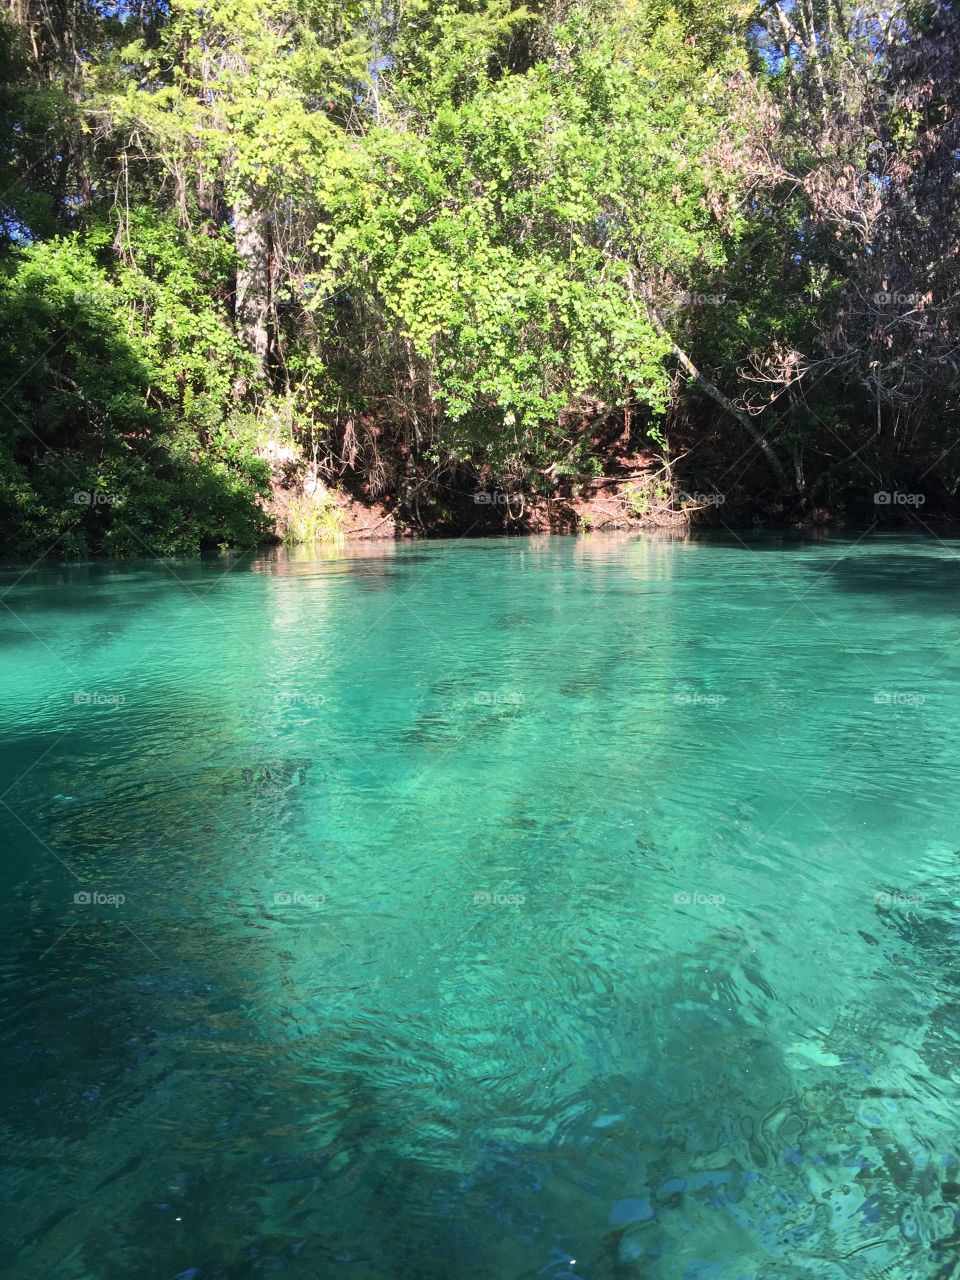 Clearest water in Florida